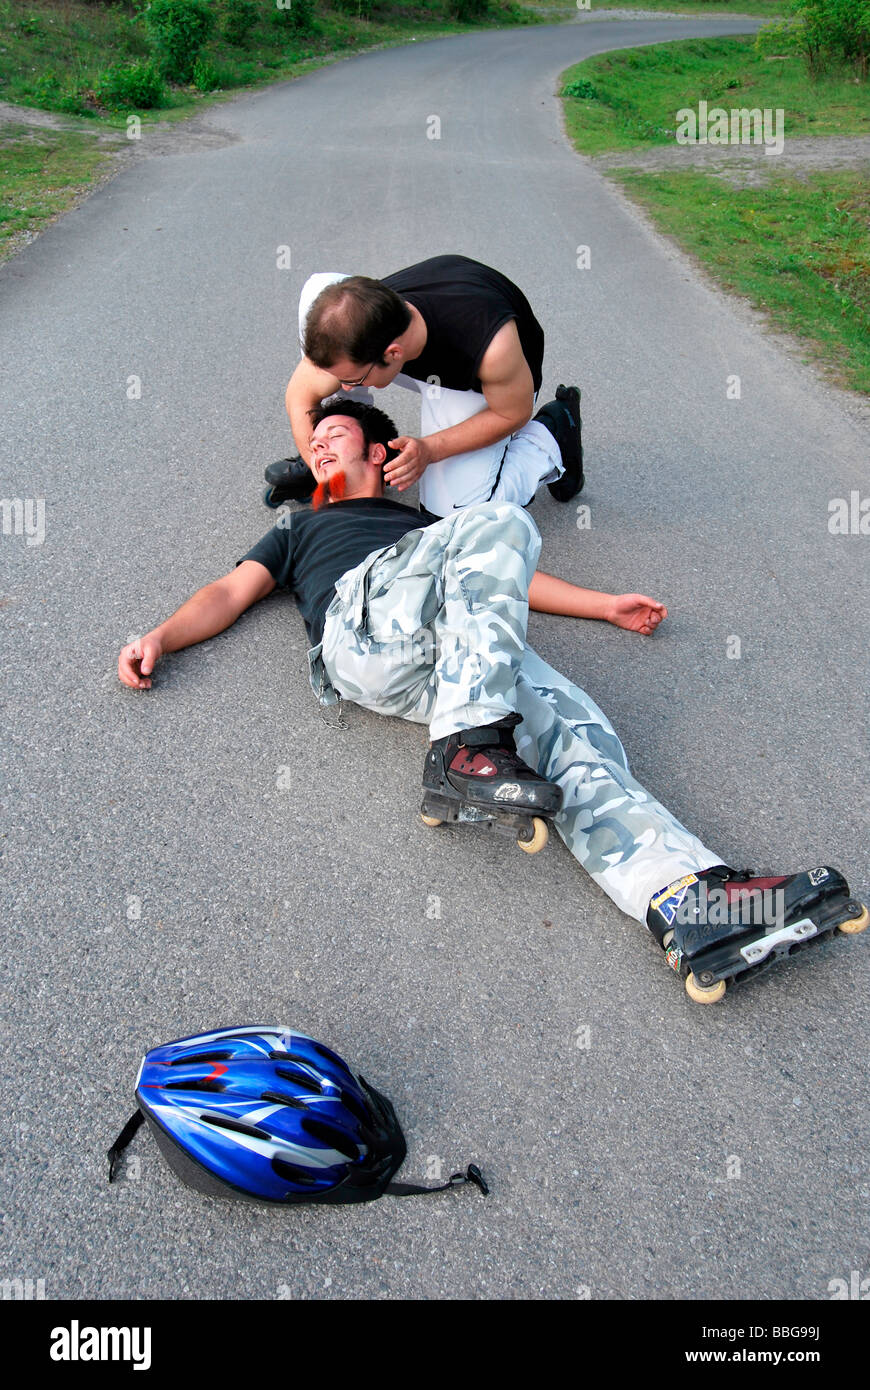 First aid, in-line skater on the floor after fall, motionless, person helping Stock Photo